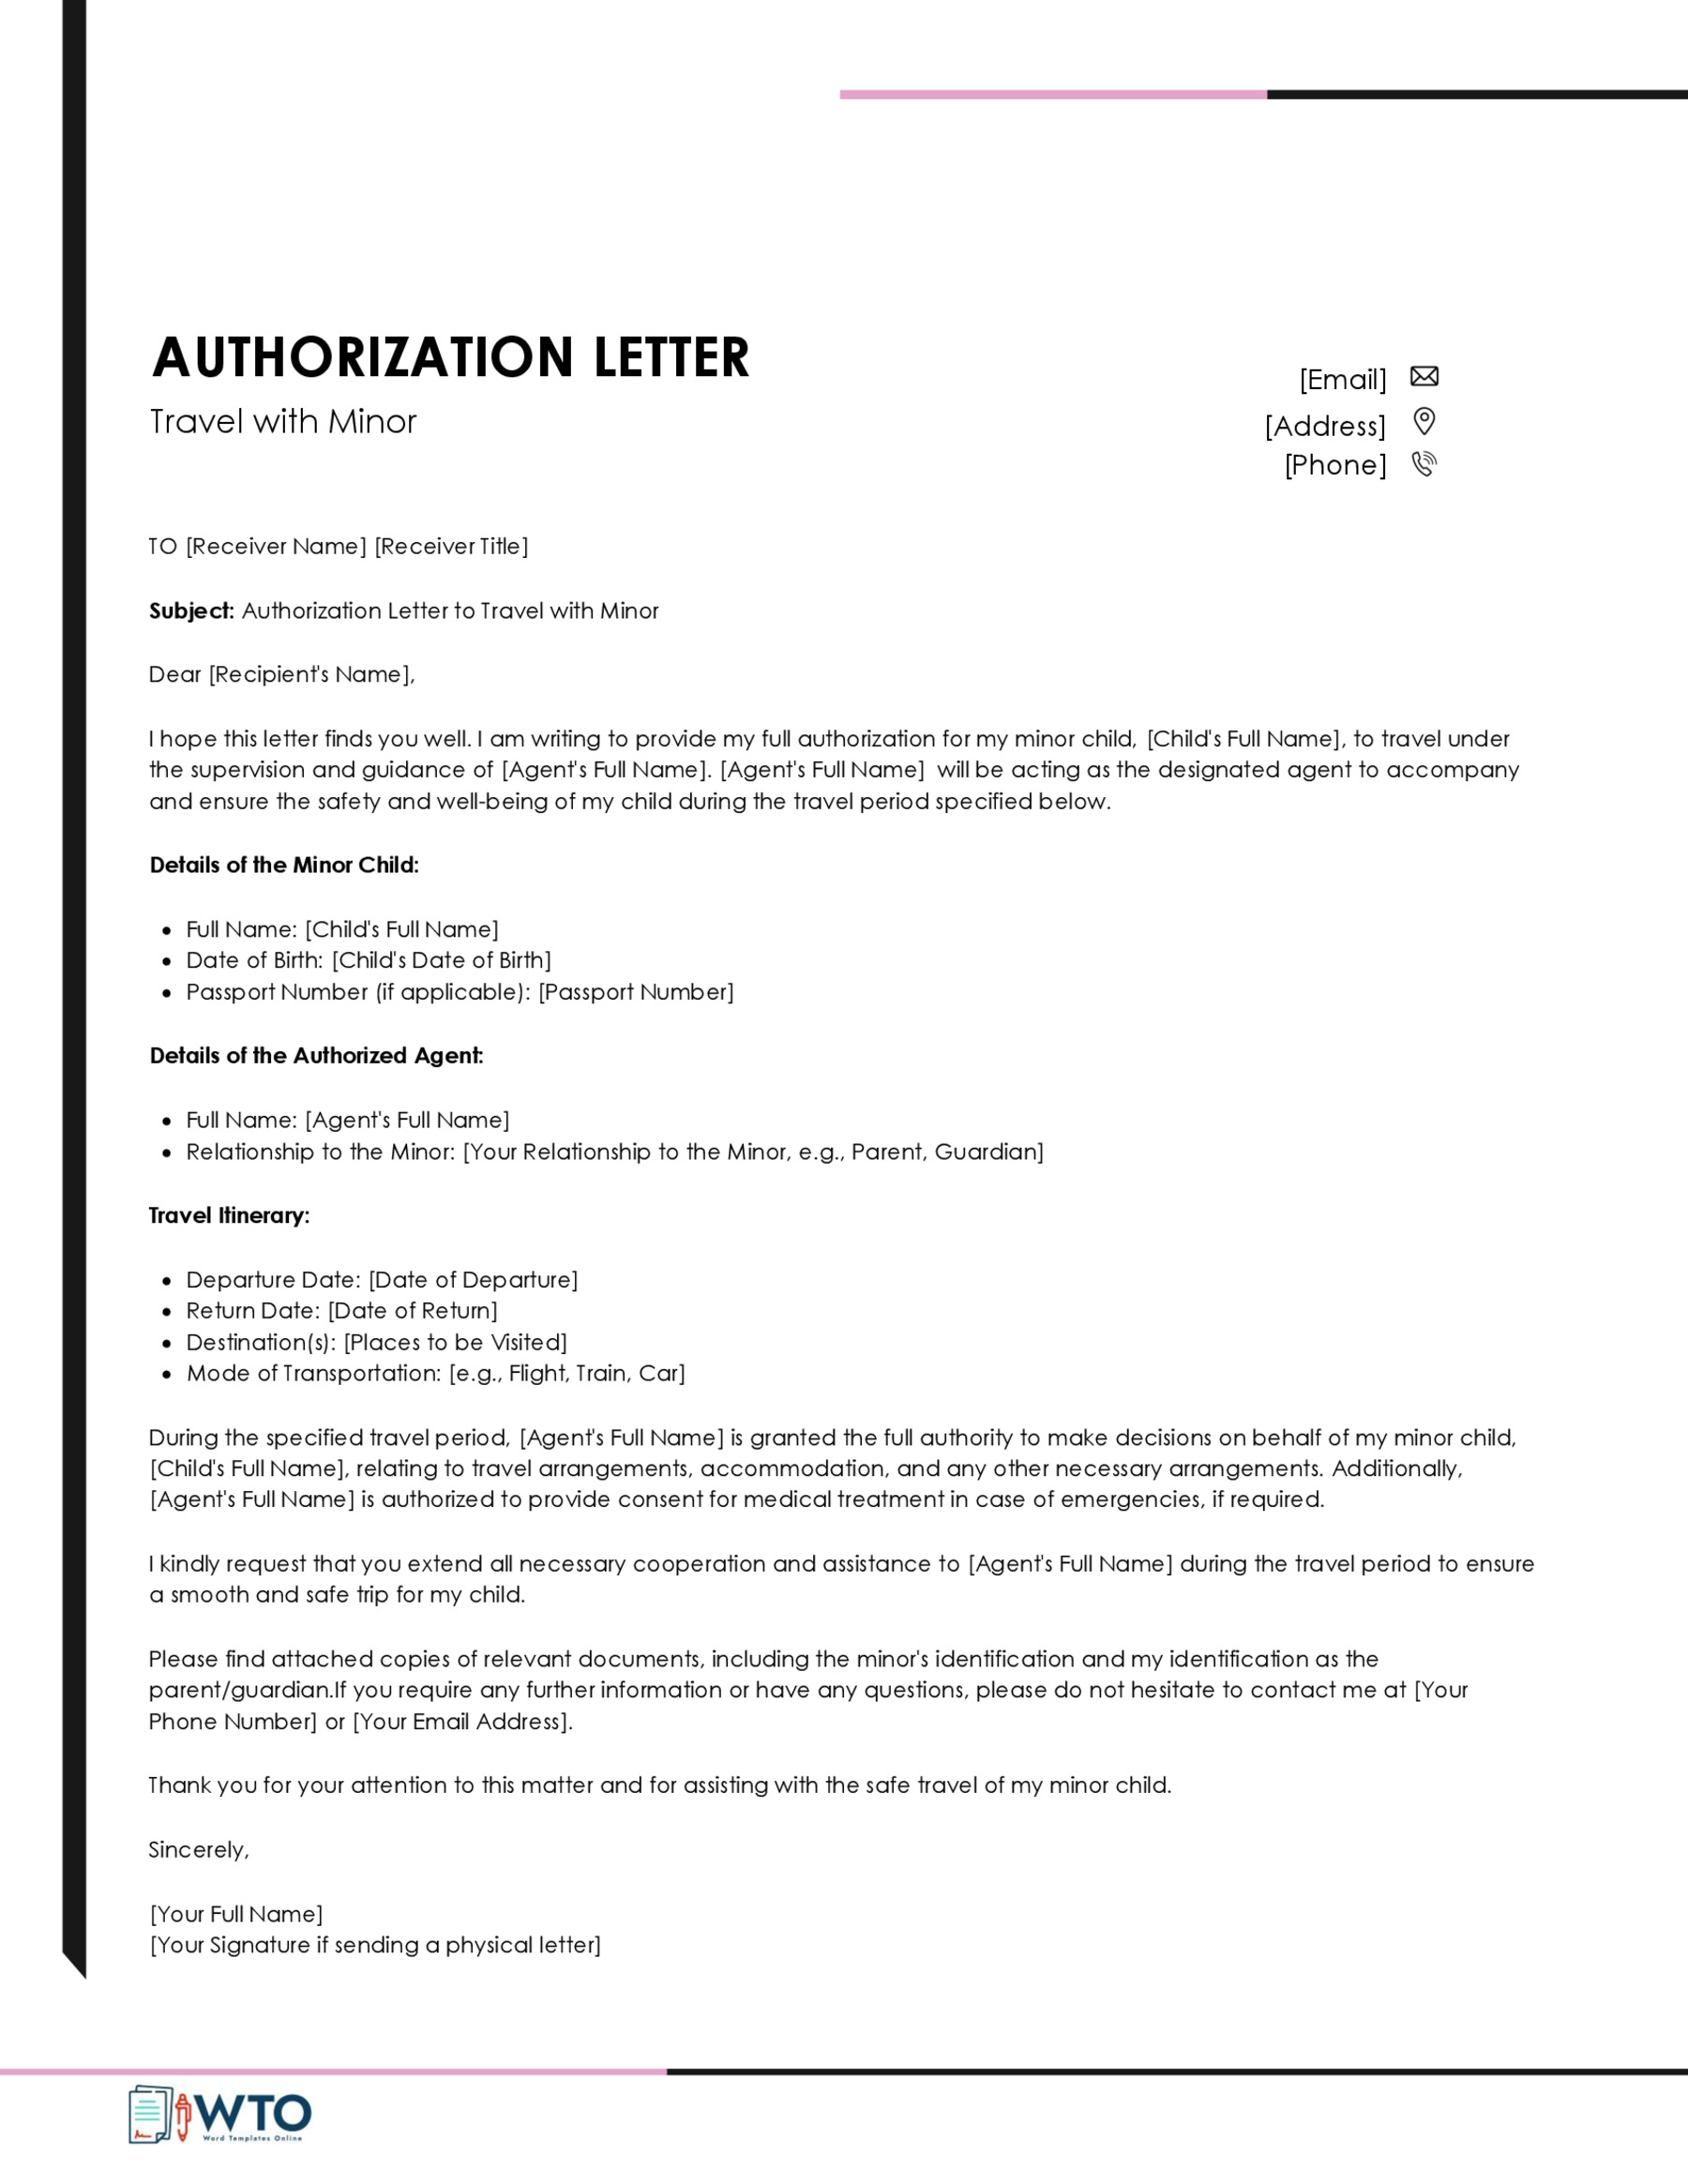 Letter to Travel with a Minor Template in word format free download